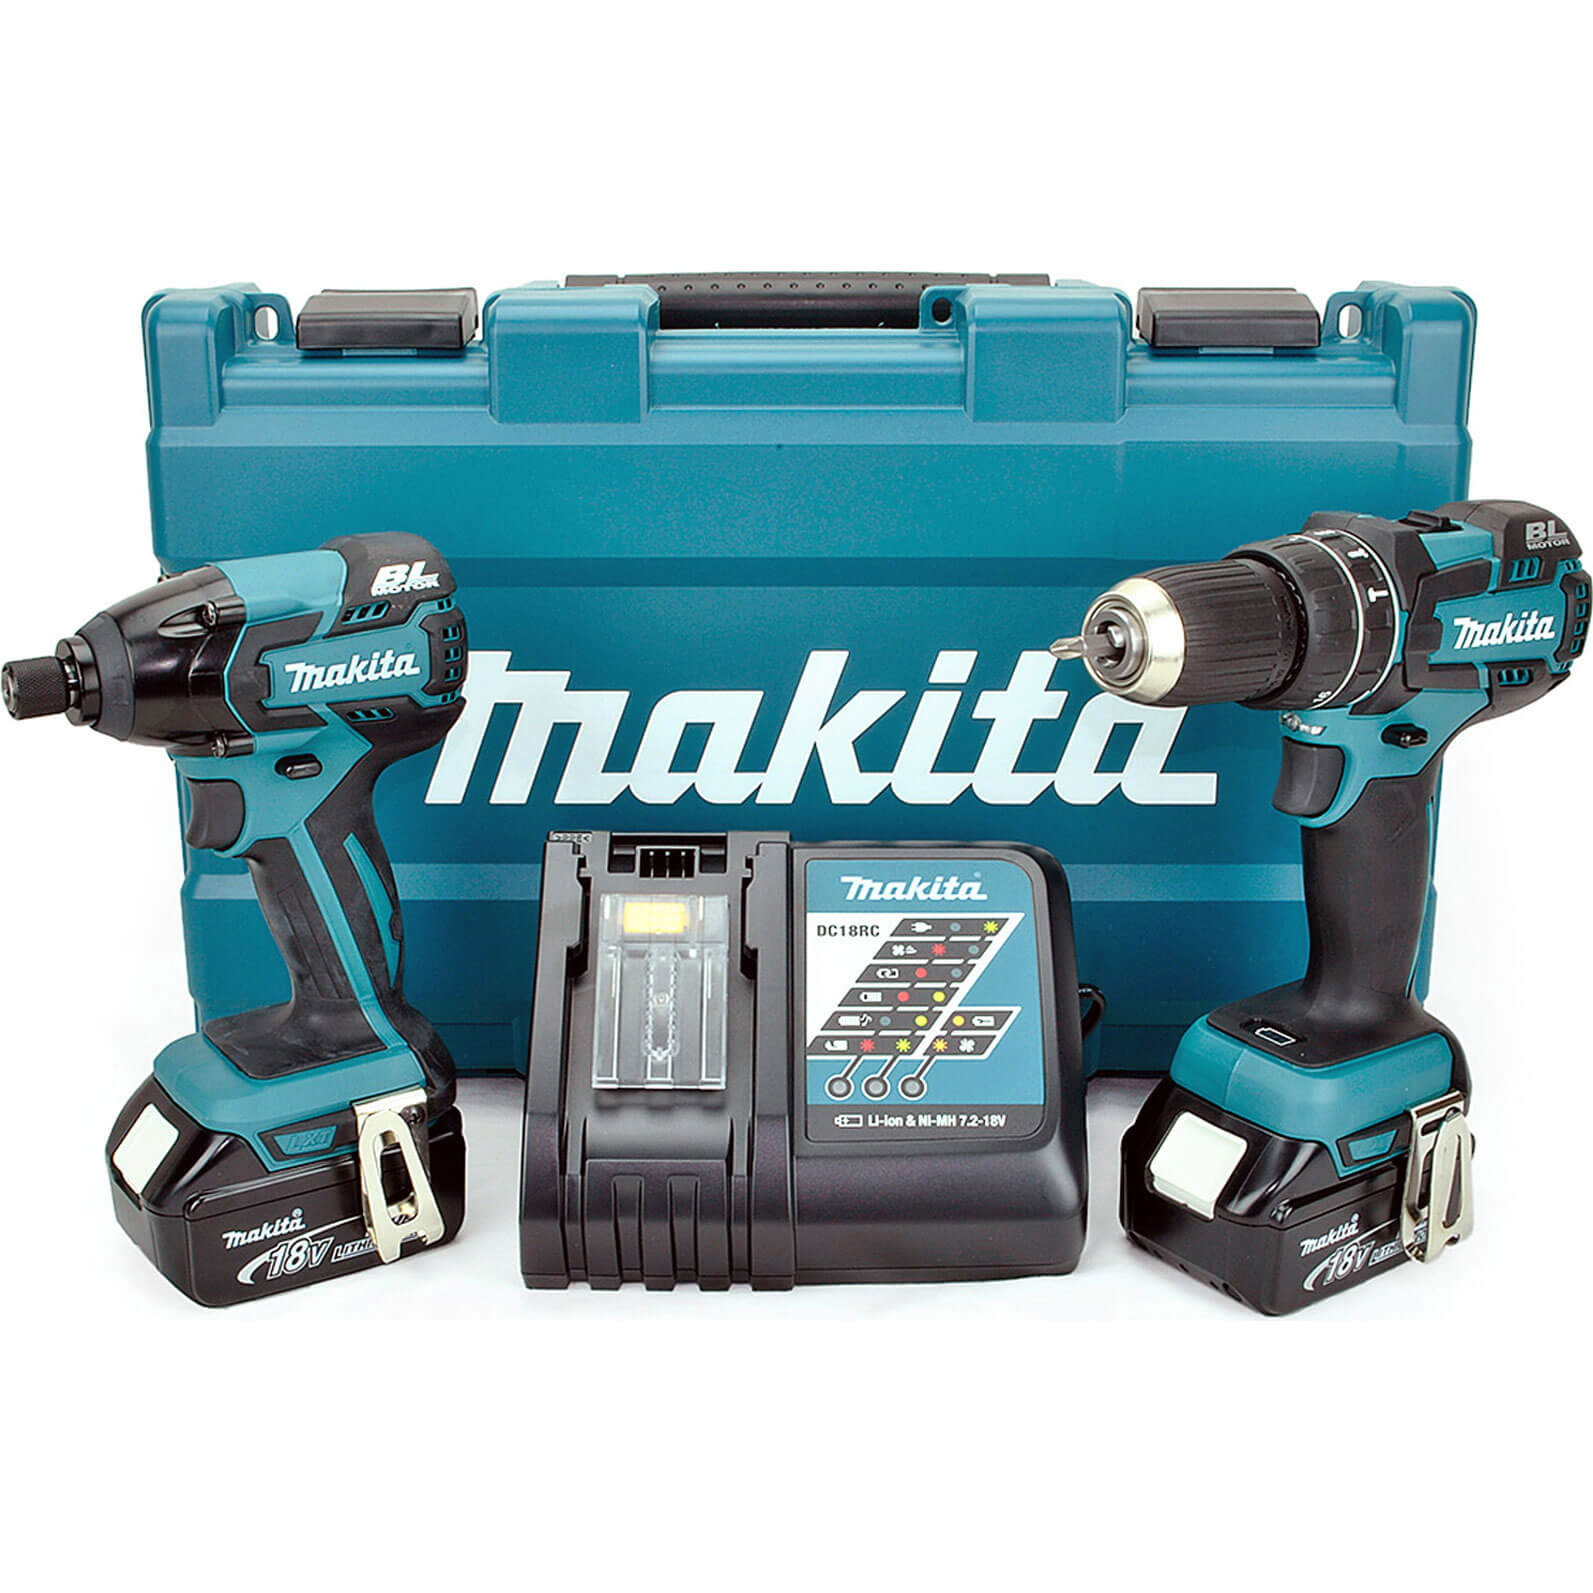 Makita DLX2002M 18v Cordless Brushless Combi Drill & Impact Driver with 2 Lithium Ion Batteries 4ah